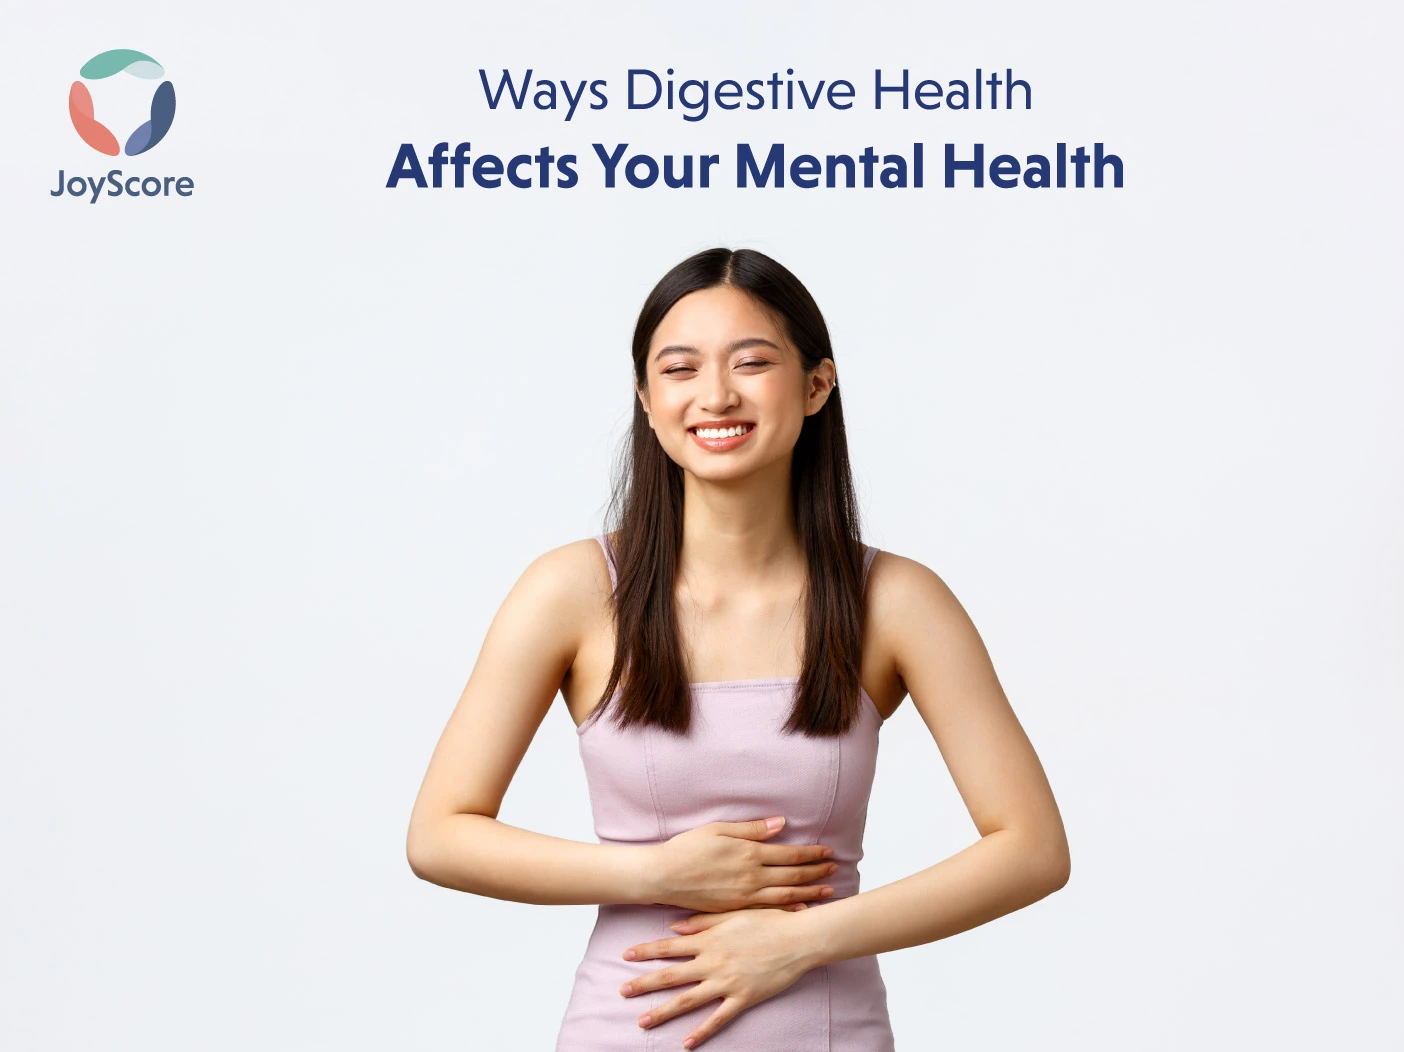 HOW-YOUR-DIGESTIVE-HEALTH-AFFECTS-YOUR-MENTAL-HEALTH